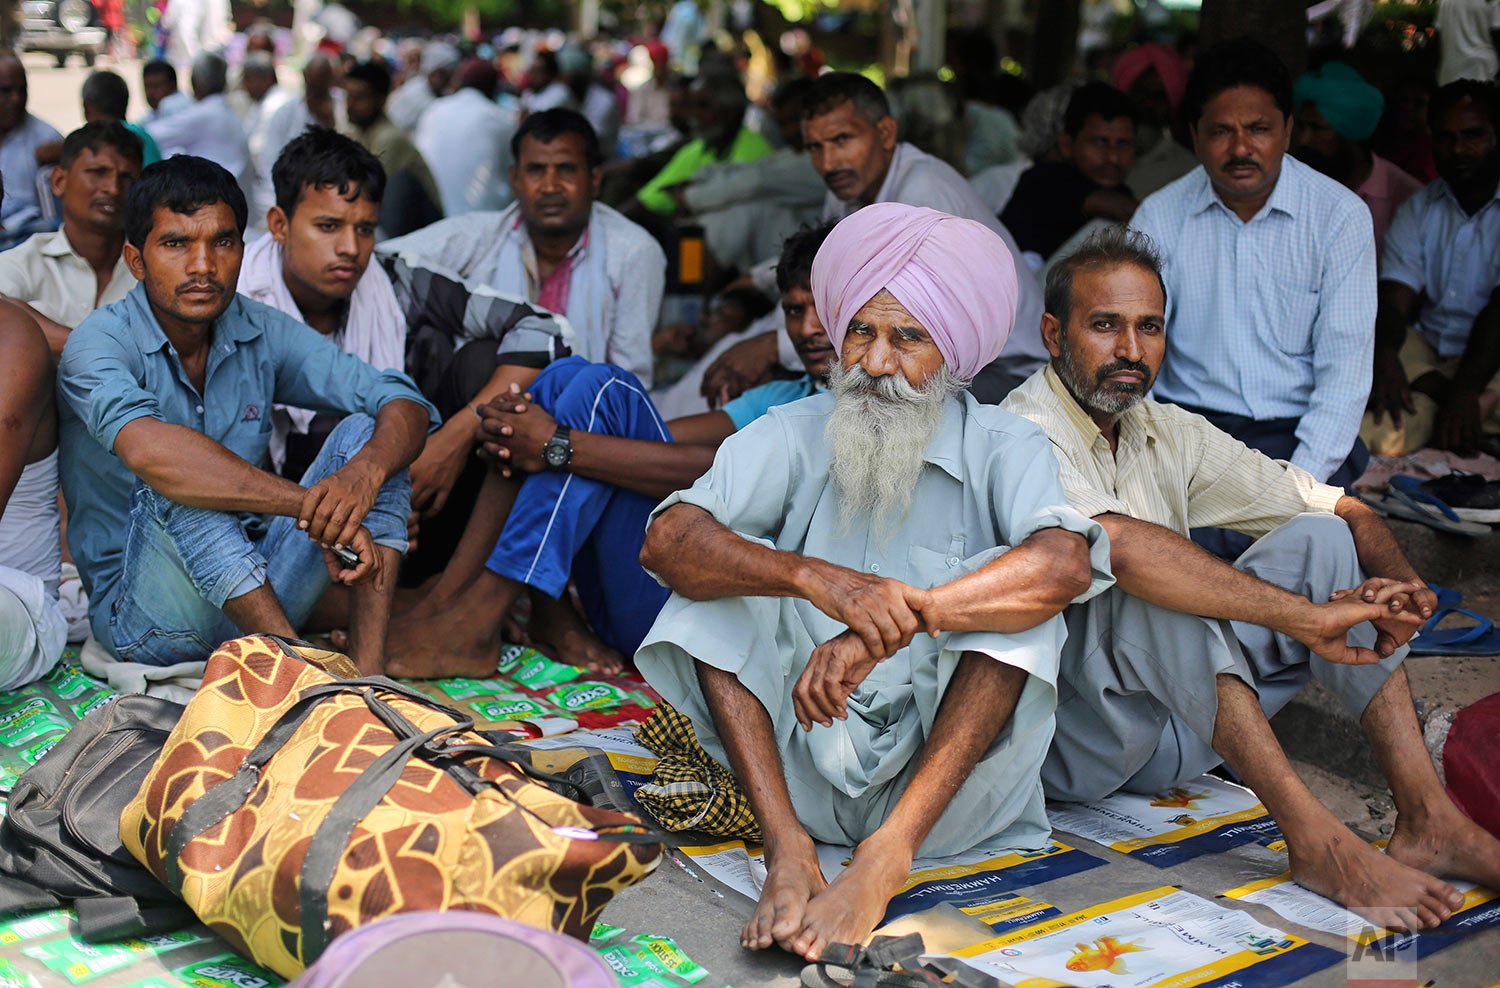  Supporters of the Dera Sacha Sauda sect squat in a public park near an Indian court in Panchkula, India, Thursday, Aug. 24, 2017.  (AP Photo/Altaf Qadri) 